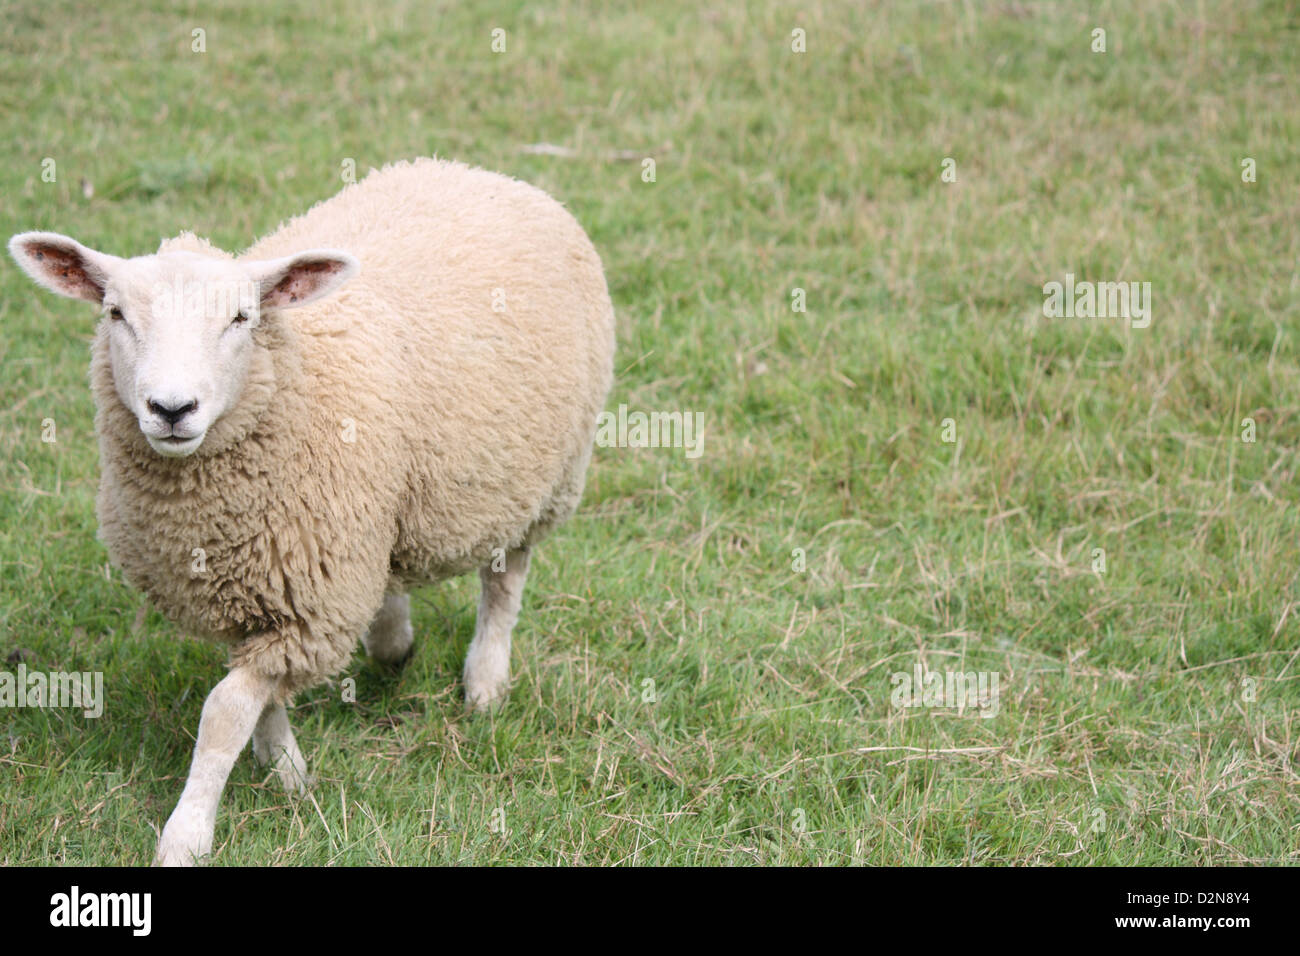 A sheep walking towards the camera in a grass field. Stock Photo